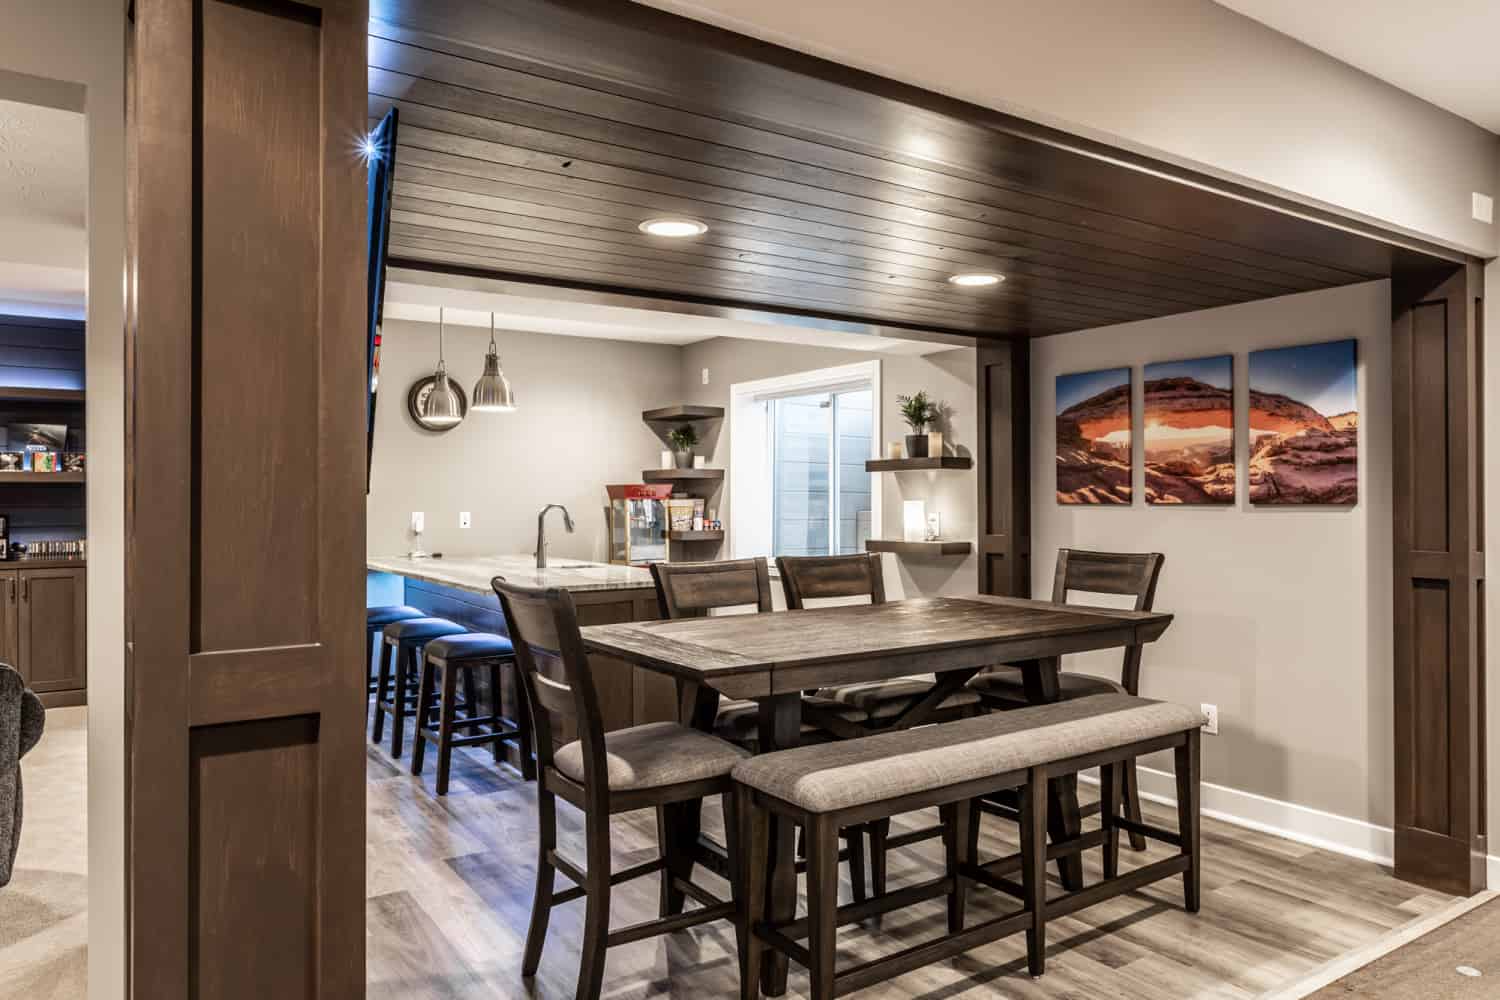 Nicholas Design Build | A home with a dining room and bar area.